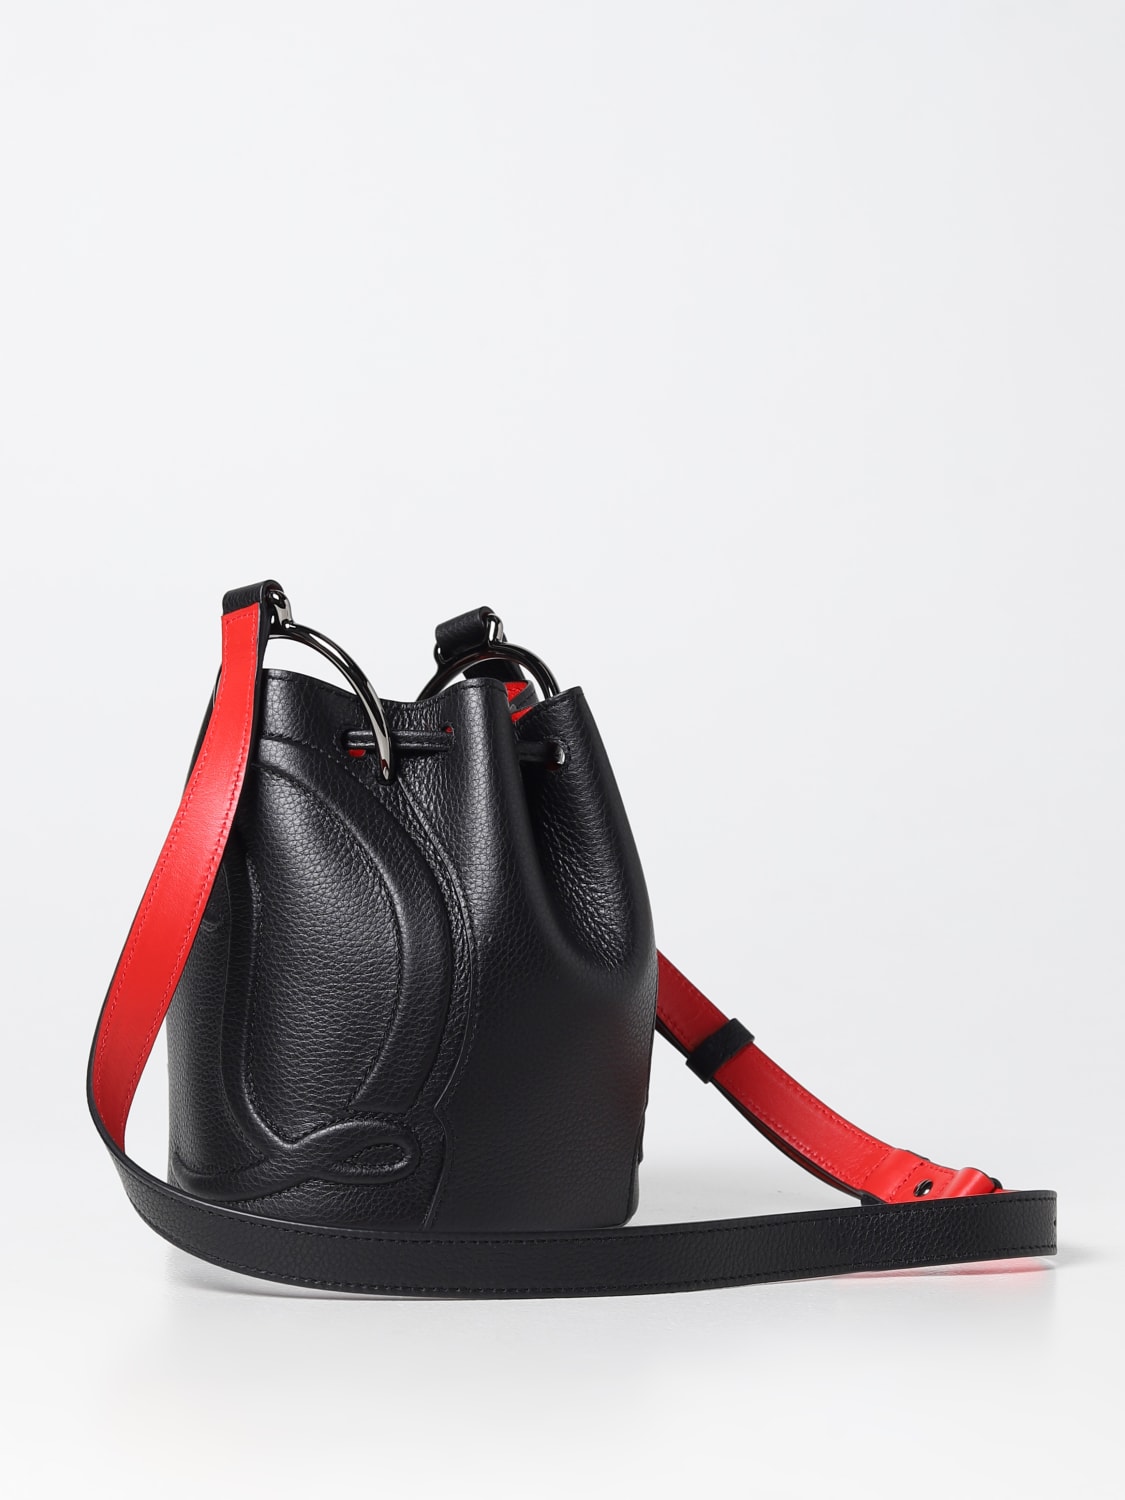 By My Side mini - Tote bag - Grained calf leather - Black - Christian  Louboutin